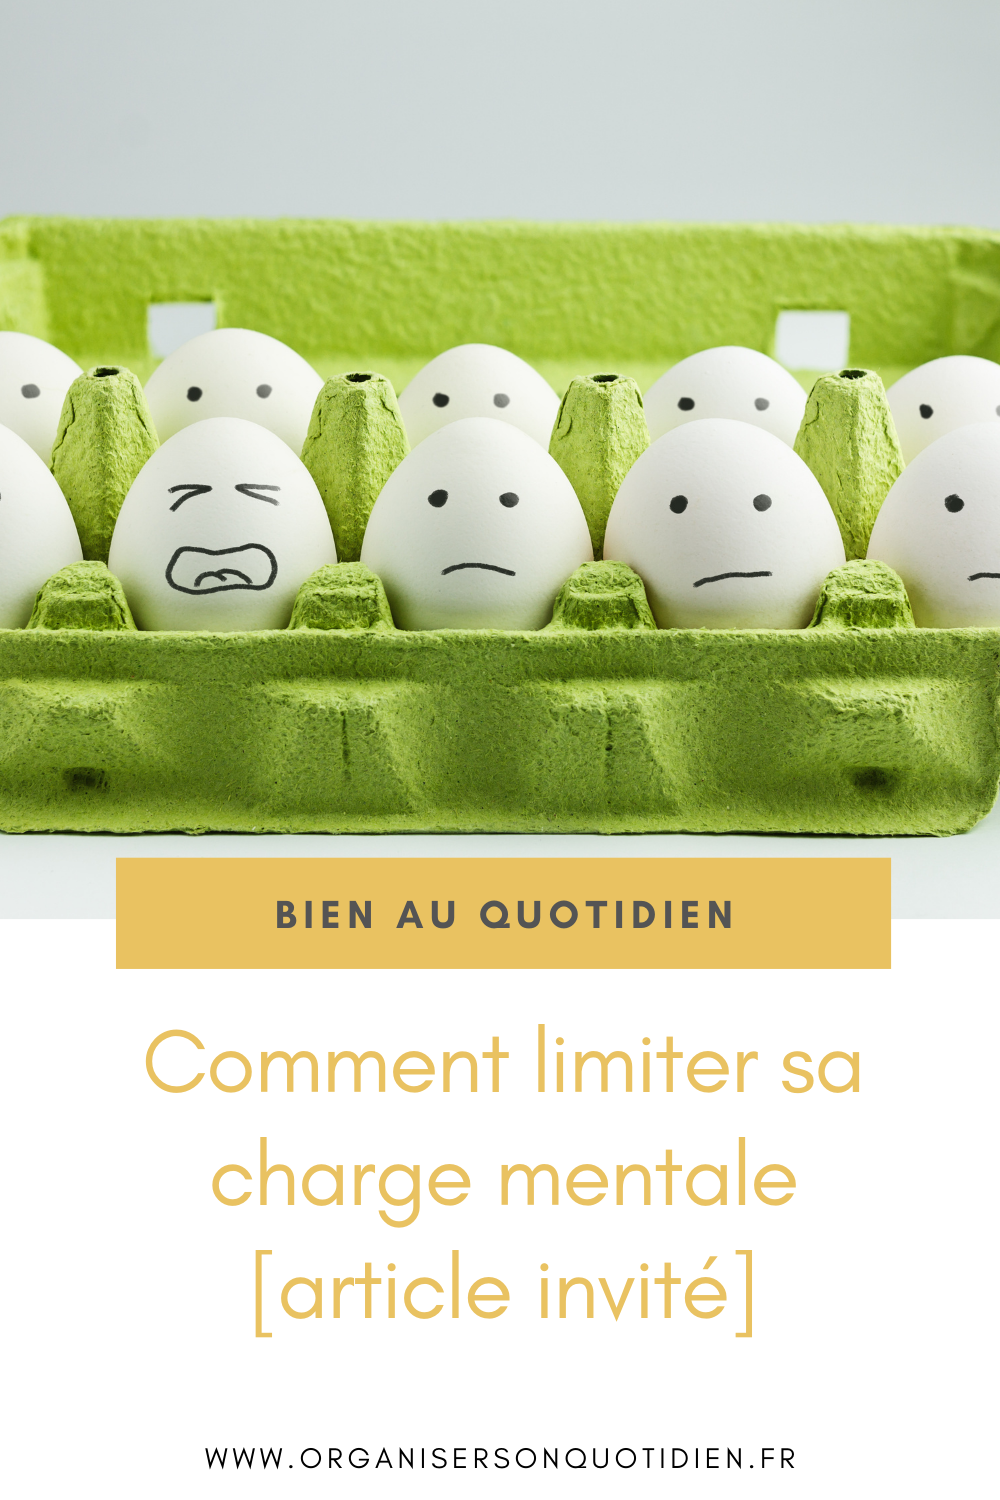 Comment limiter sa charge mentale